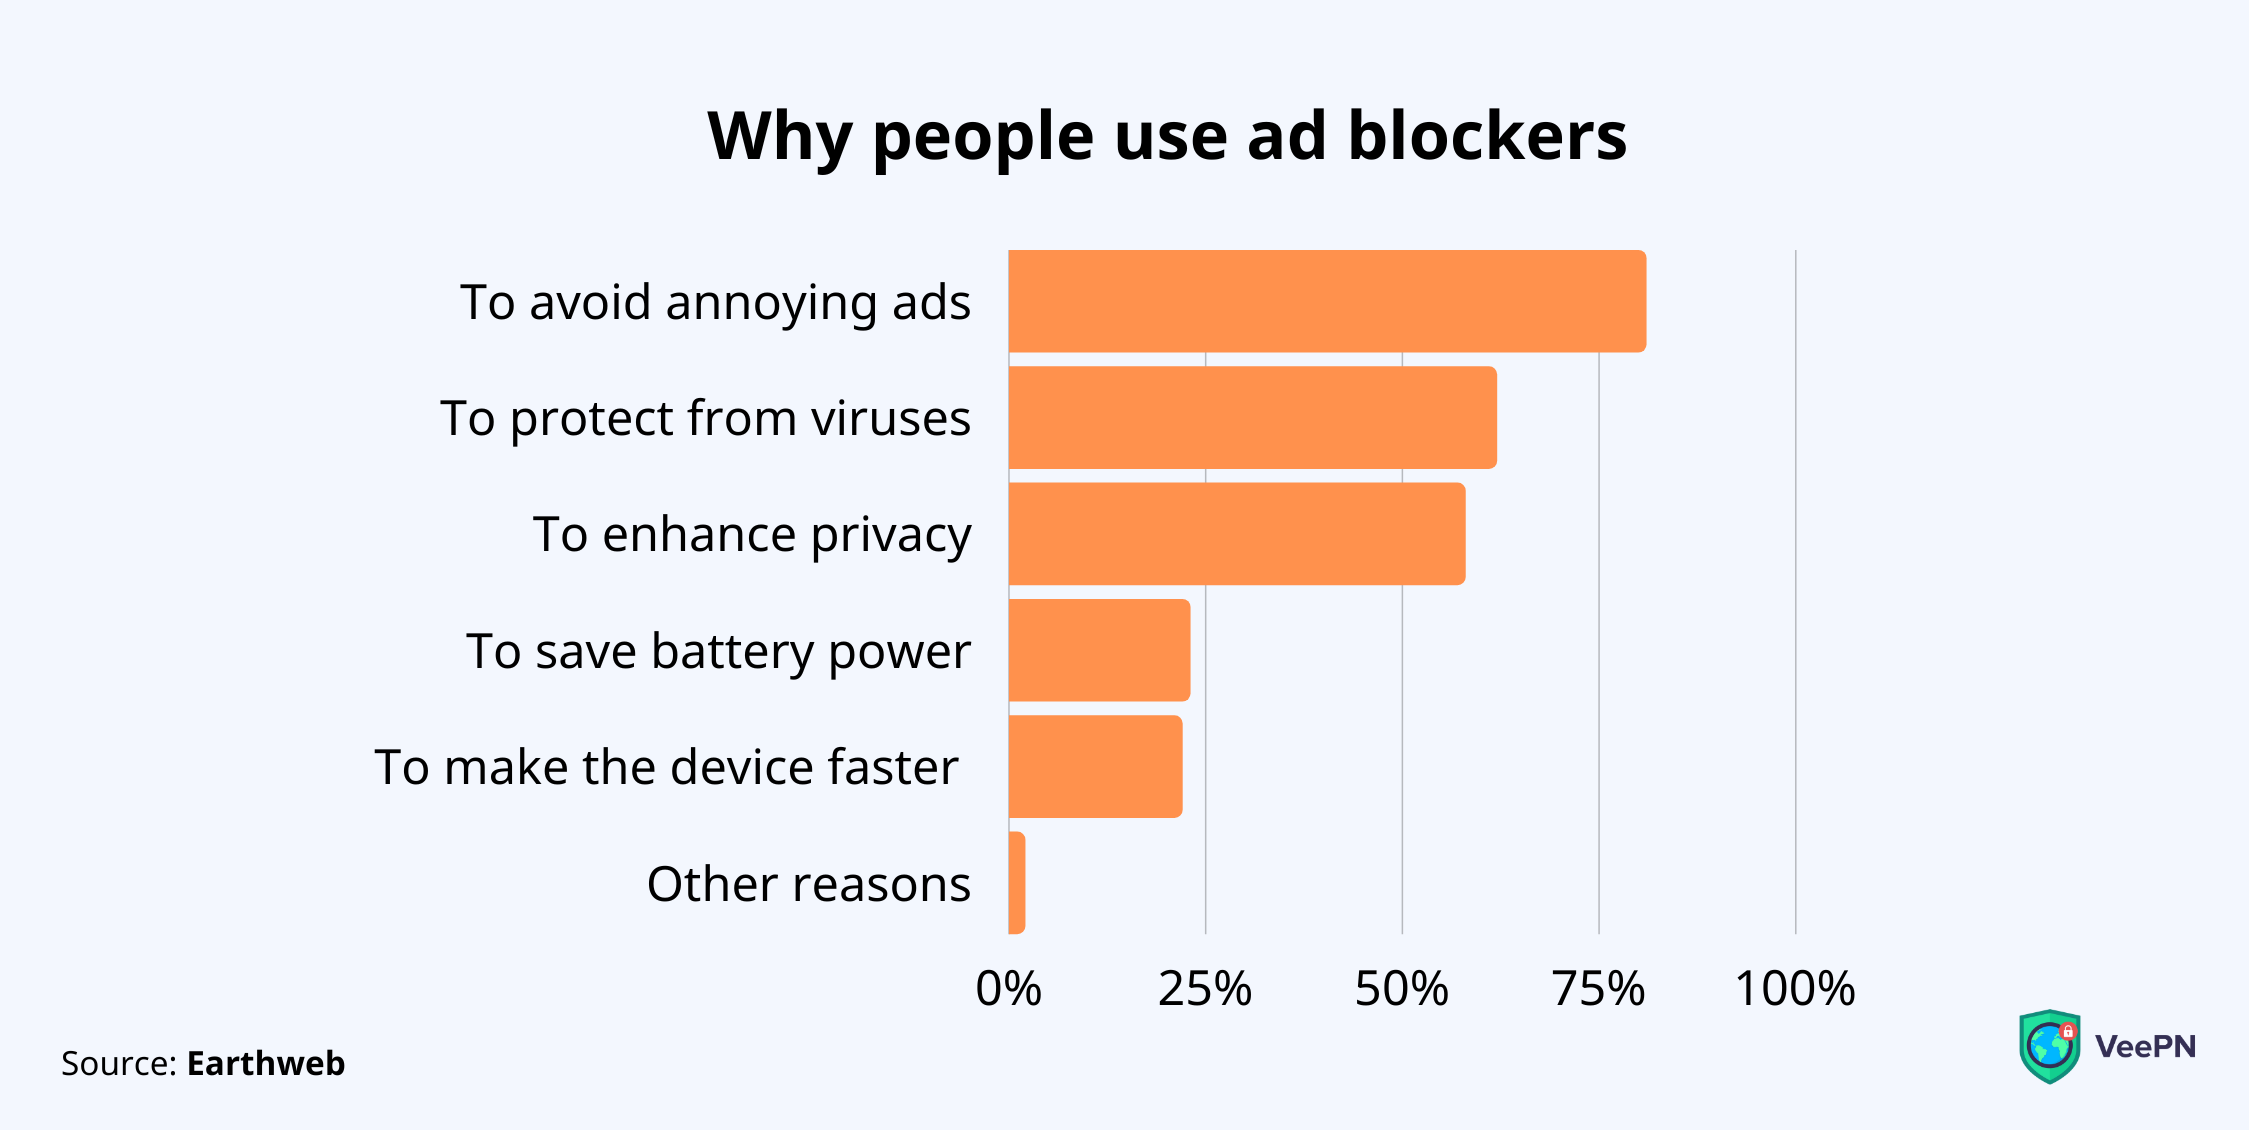 Why people use ad blockers